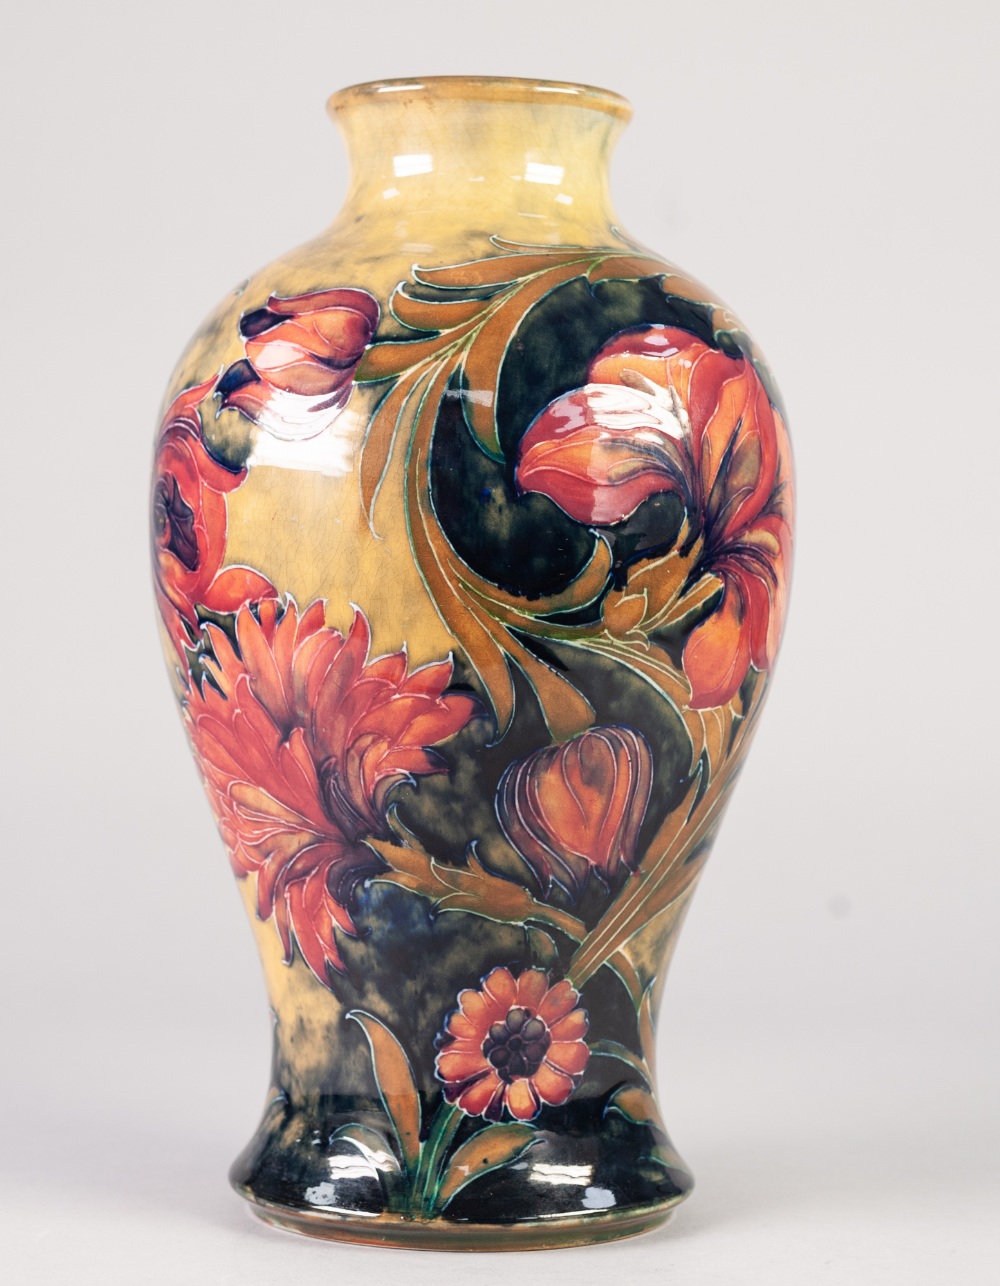 A GOOD INTER-WAR YEARS WILLIAM MOORCROFT POTTERY INVERTED BALUSTER SHAPE VASE, tube-lined with brick - Image 4 of 5